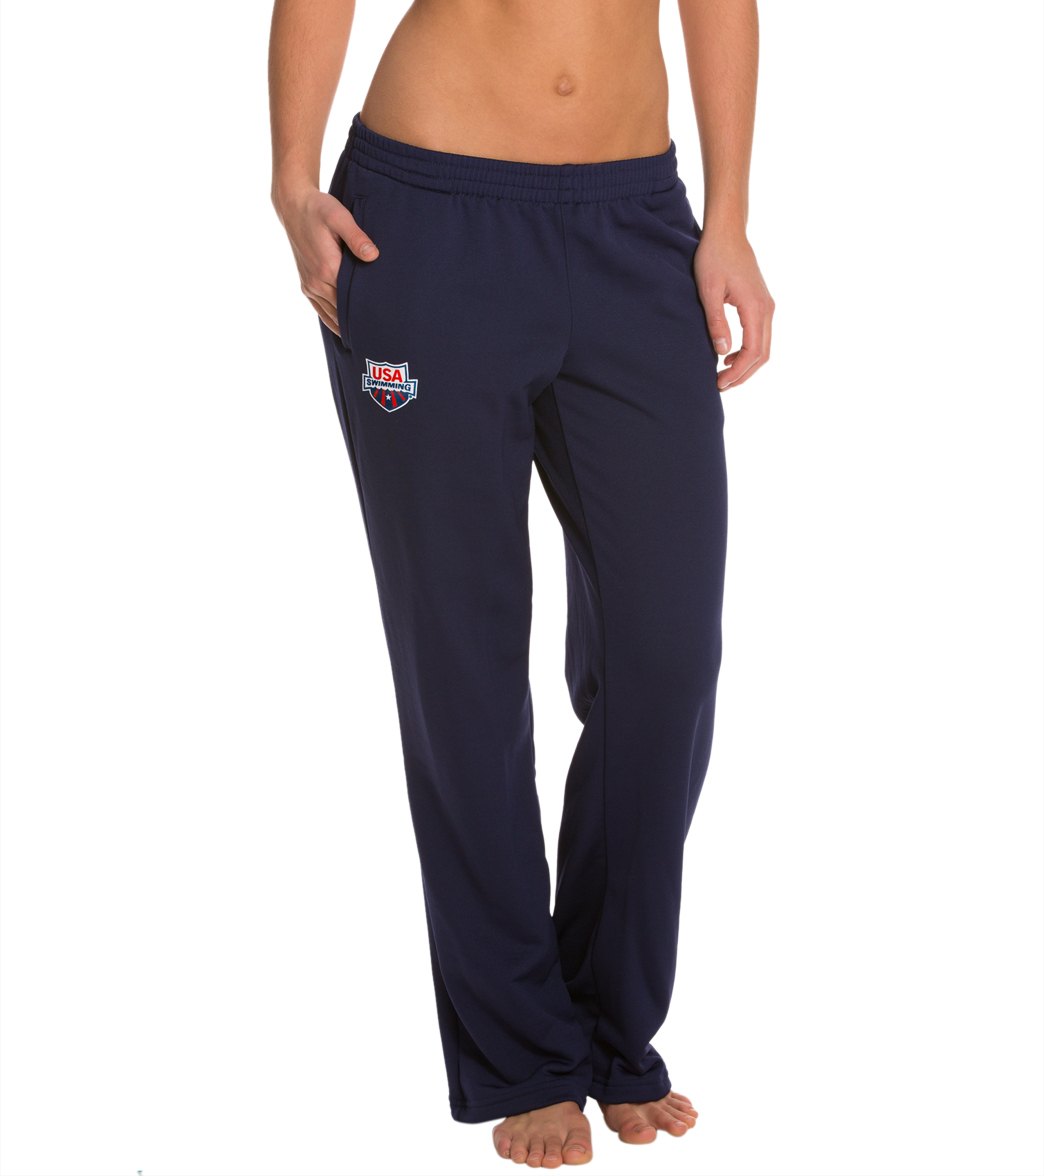 TYR USA Swimming Women's Alliance Victory Warm Up Pant at